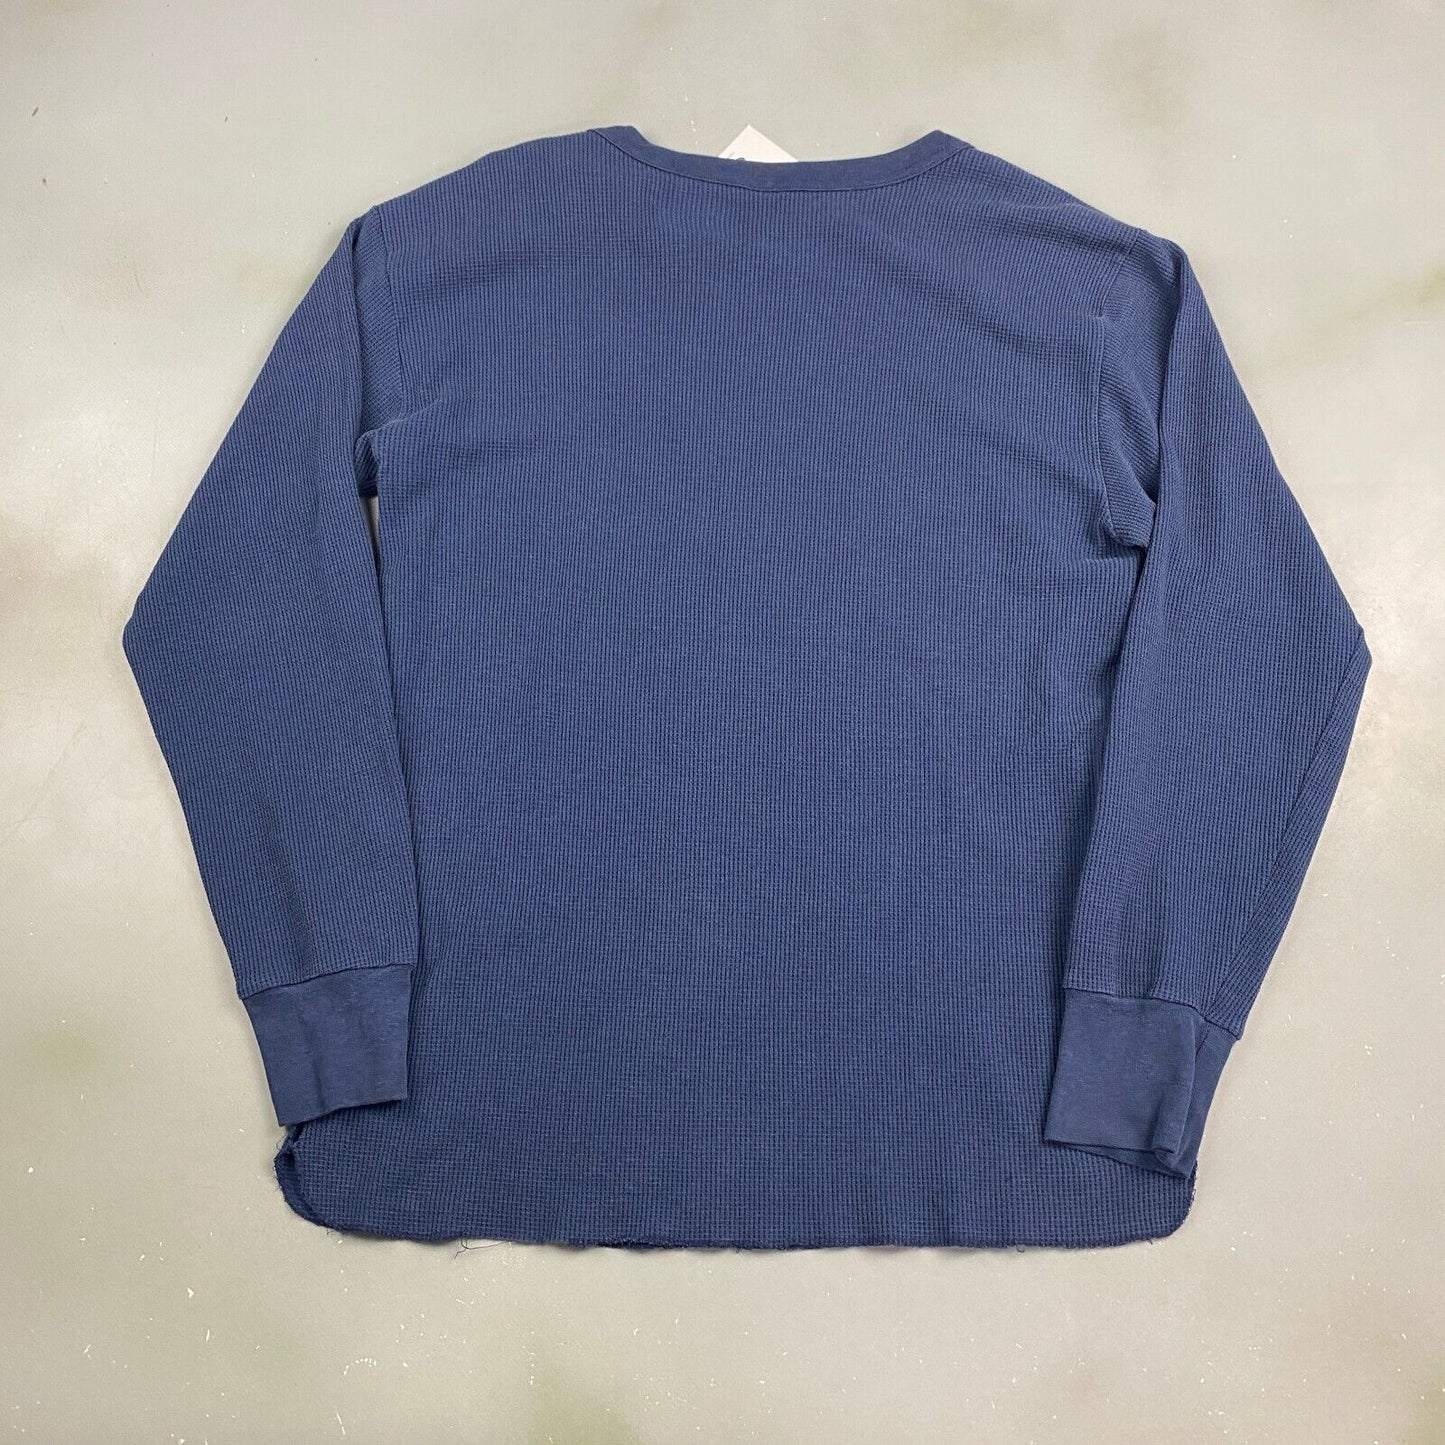 VINTAGE 90s LEE Faded Navy Thermal Long Sleeve T-Shirt sz Large Adult